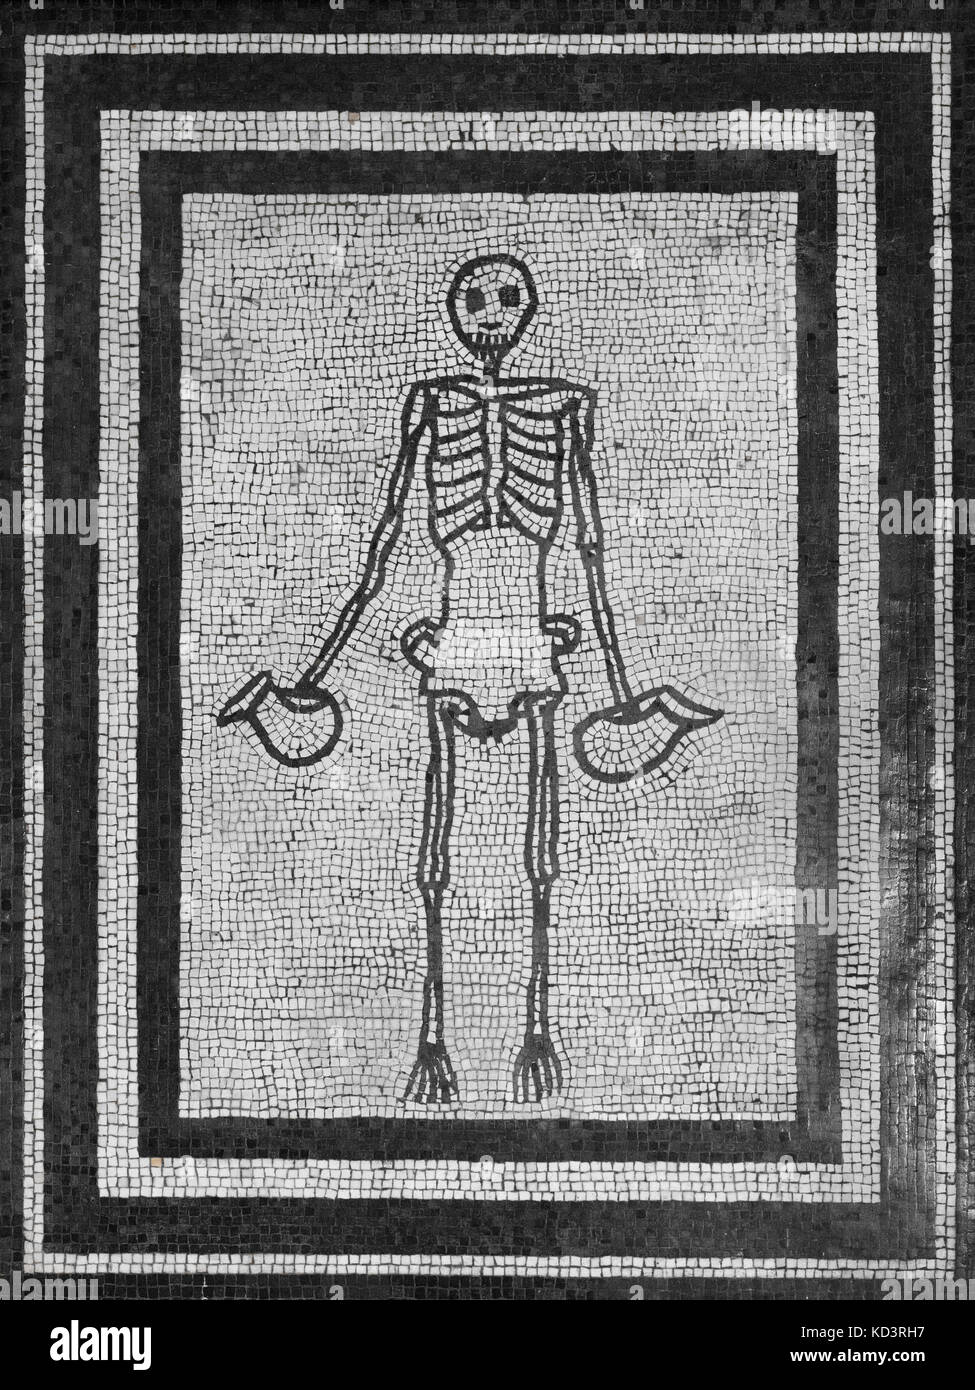 Naples. Italy. Roman mosaic of a skeleton holding two jugs (1st century A.D.), from Pompeii. Museo Archeologico Nazionale di Napoli.  Scheletro con du Stock Photo